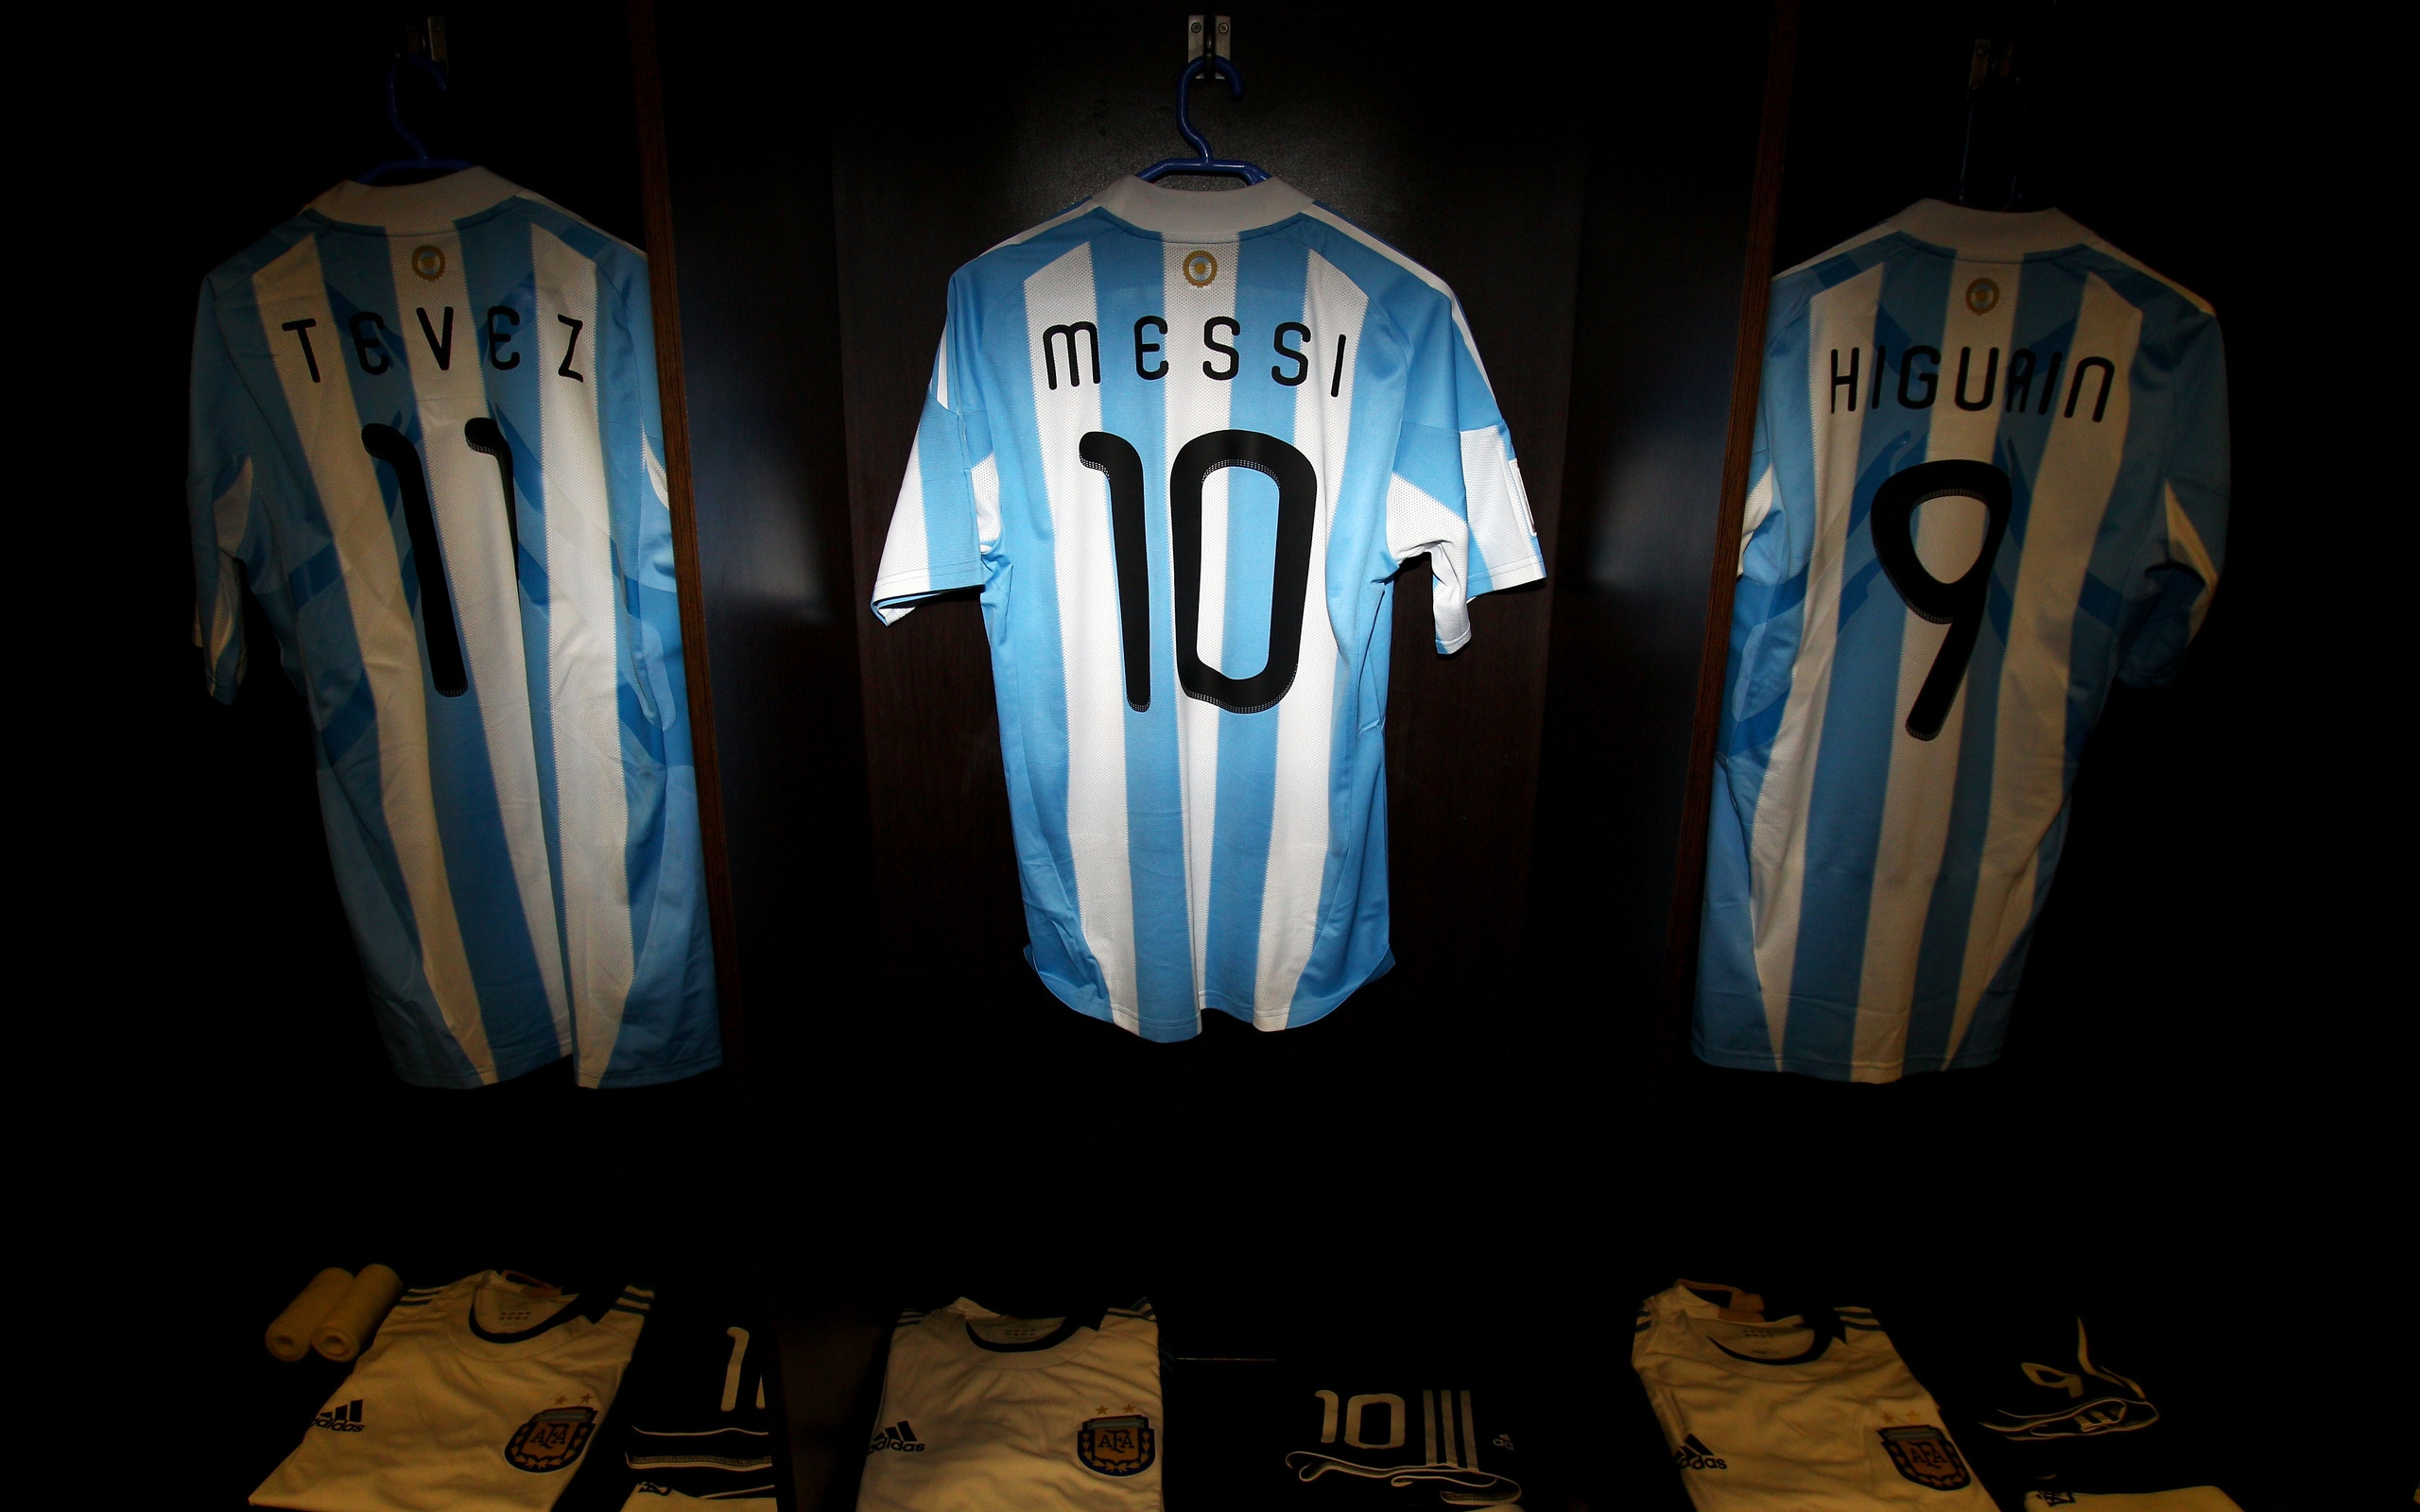 Tshirt of Messi, Tevez and Higuain for 2560 x 1600 widescreen resolution